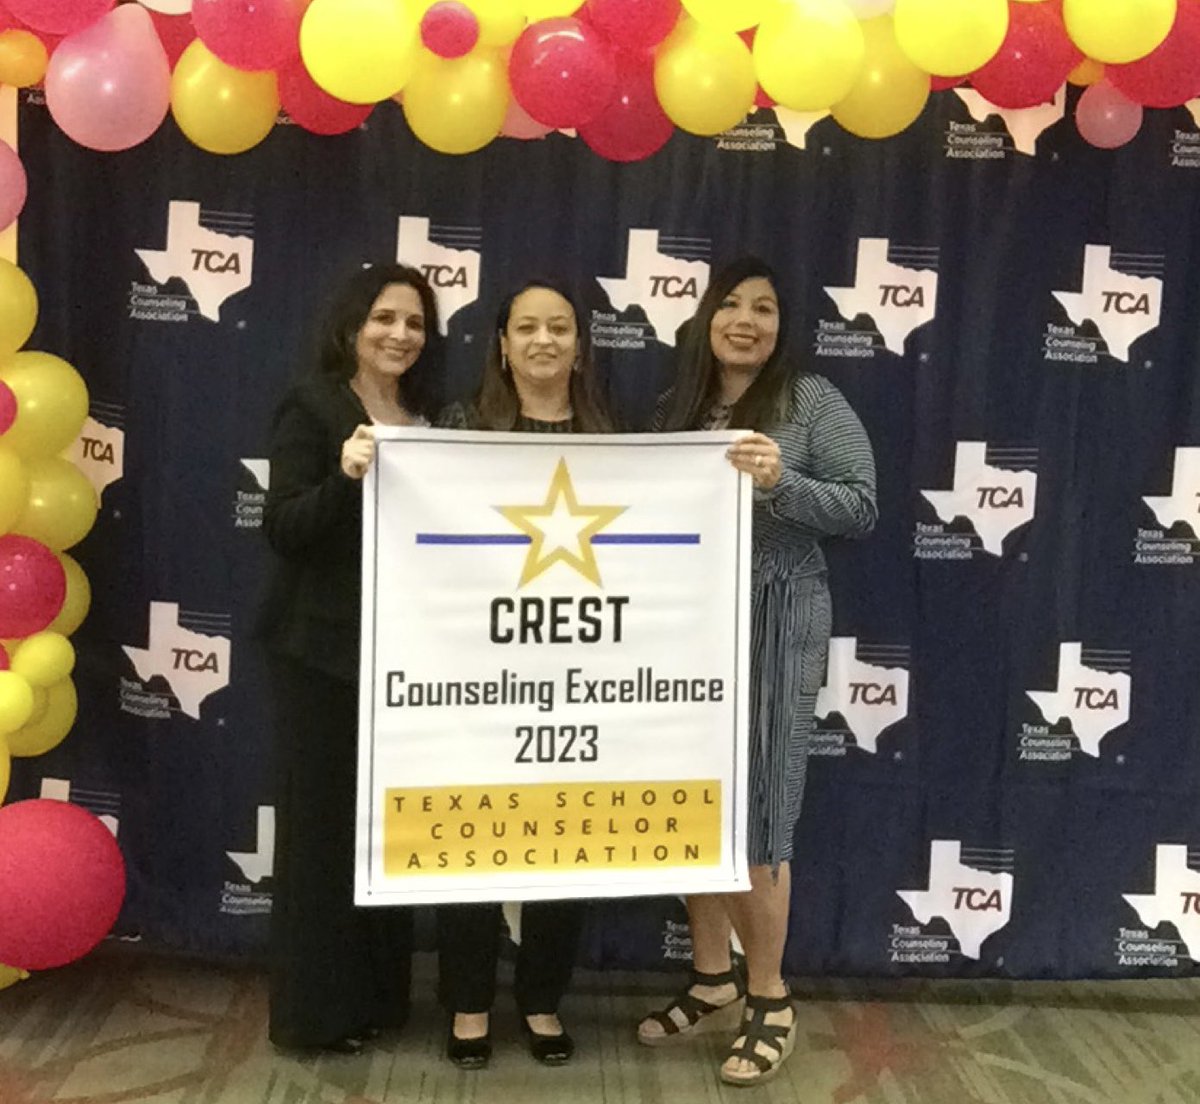 Happy School Counseling Week @AdrianaCasso and @Cmans17 Congratulations on your Crest Award! @migdaliagpowers @Ms_EPuente